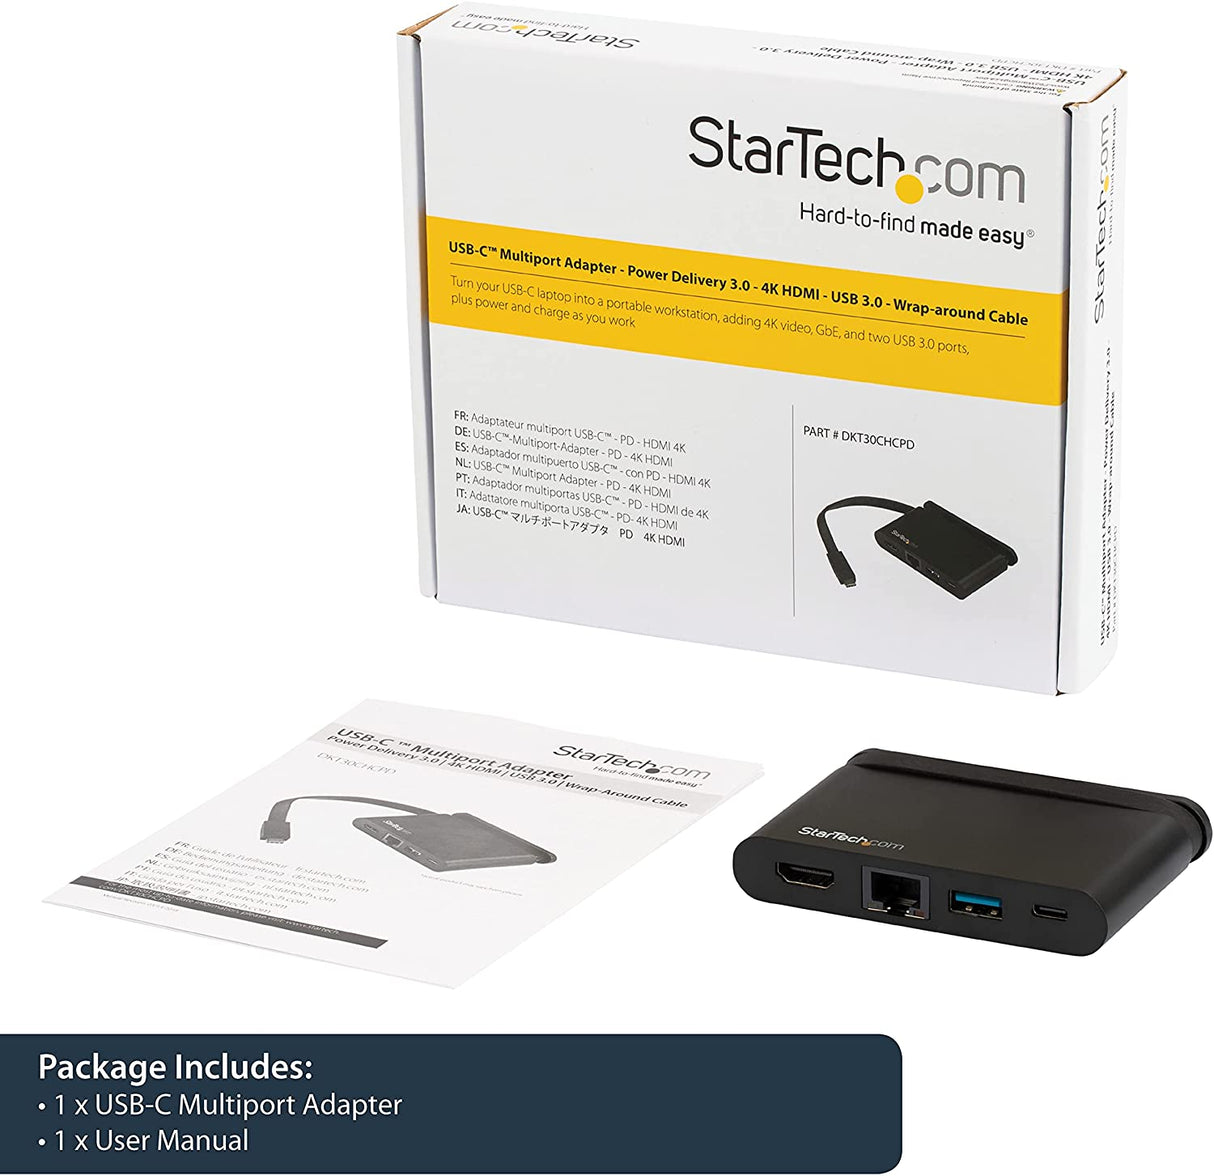 StarTech.com USB C Multiport Adapter - Portable USB-C Dock with 4K HDMI - 100W PD 3.0 Pass-Through, 1x USB-A, 1x USB-C, GbE - Thunderbolt 3 &amp; USB Type-C Laptop Travel Dock - Mac &amp; Windows (DKT30CHCPD) 100W Power Delivery | 1x USB-A 3.0 Fast Charge